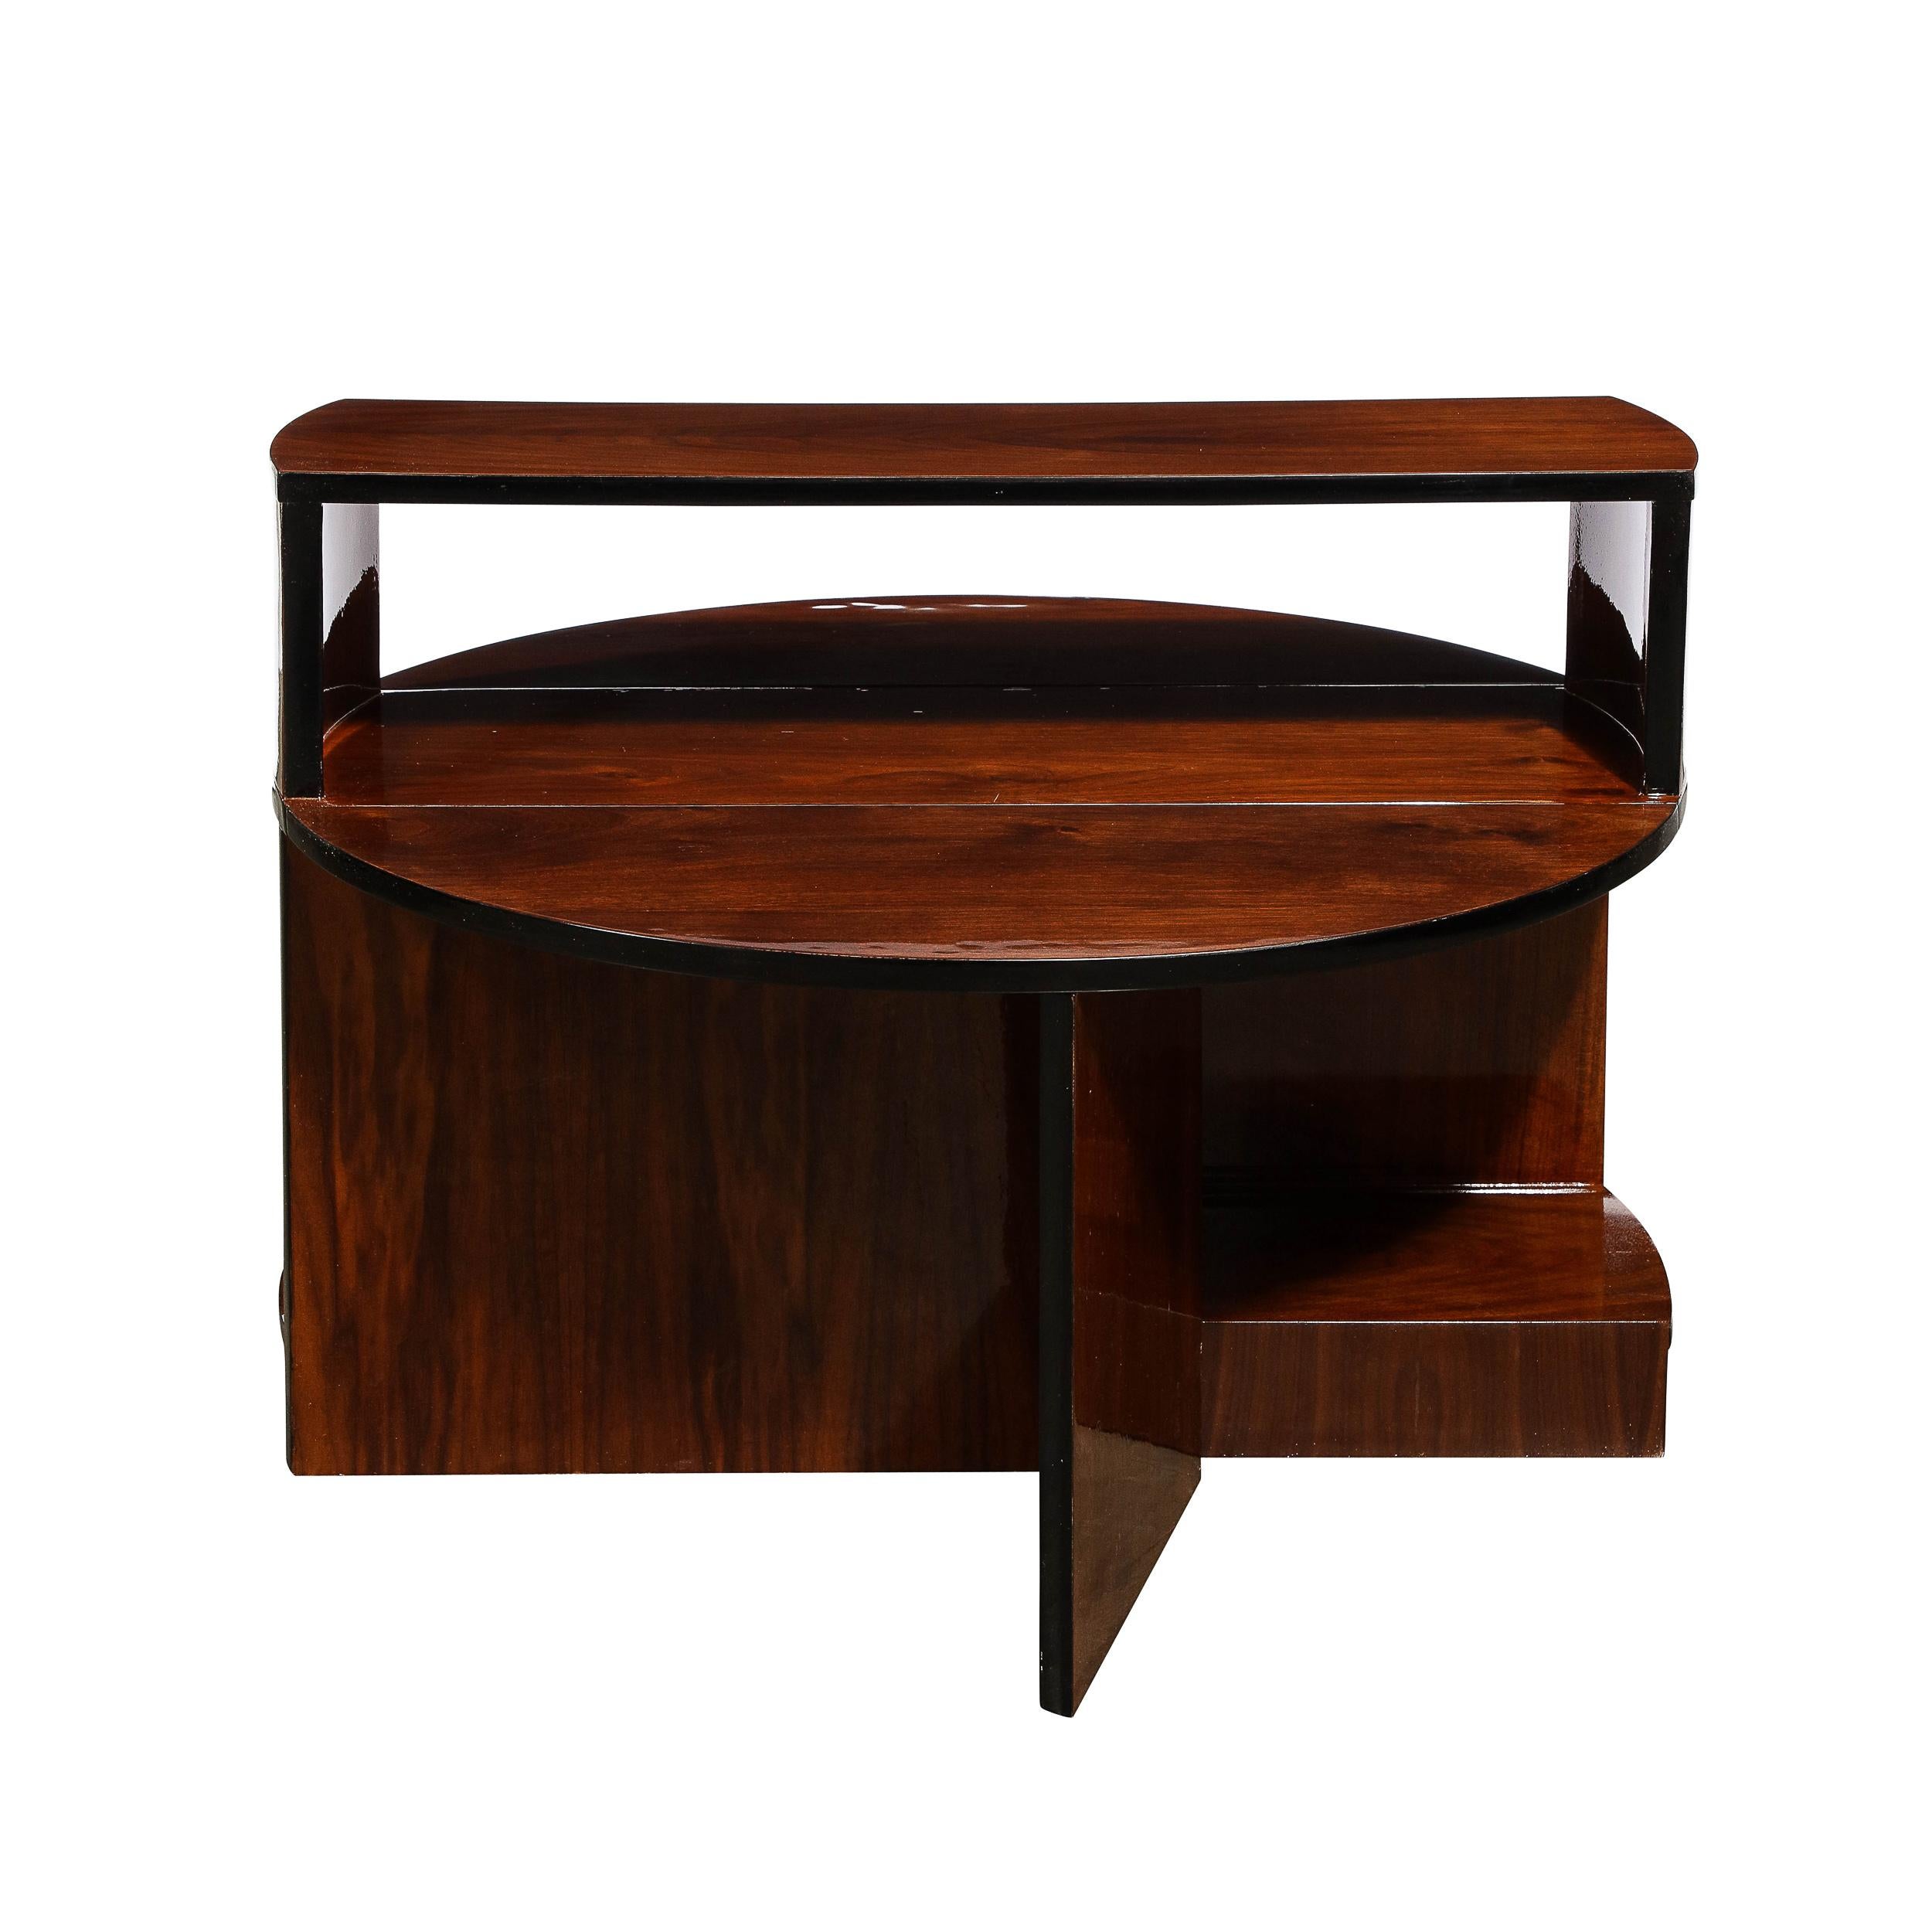 This beautiful Art Deco Machine Age cubist folding coffee table was realized in the United States circa 1935. Its graphic silhouette offers a streamlined volumetric rectilinear base in bookmatched walnut with black lacquer edges. When closed, the